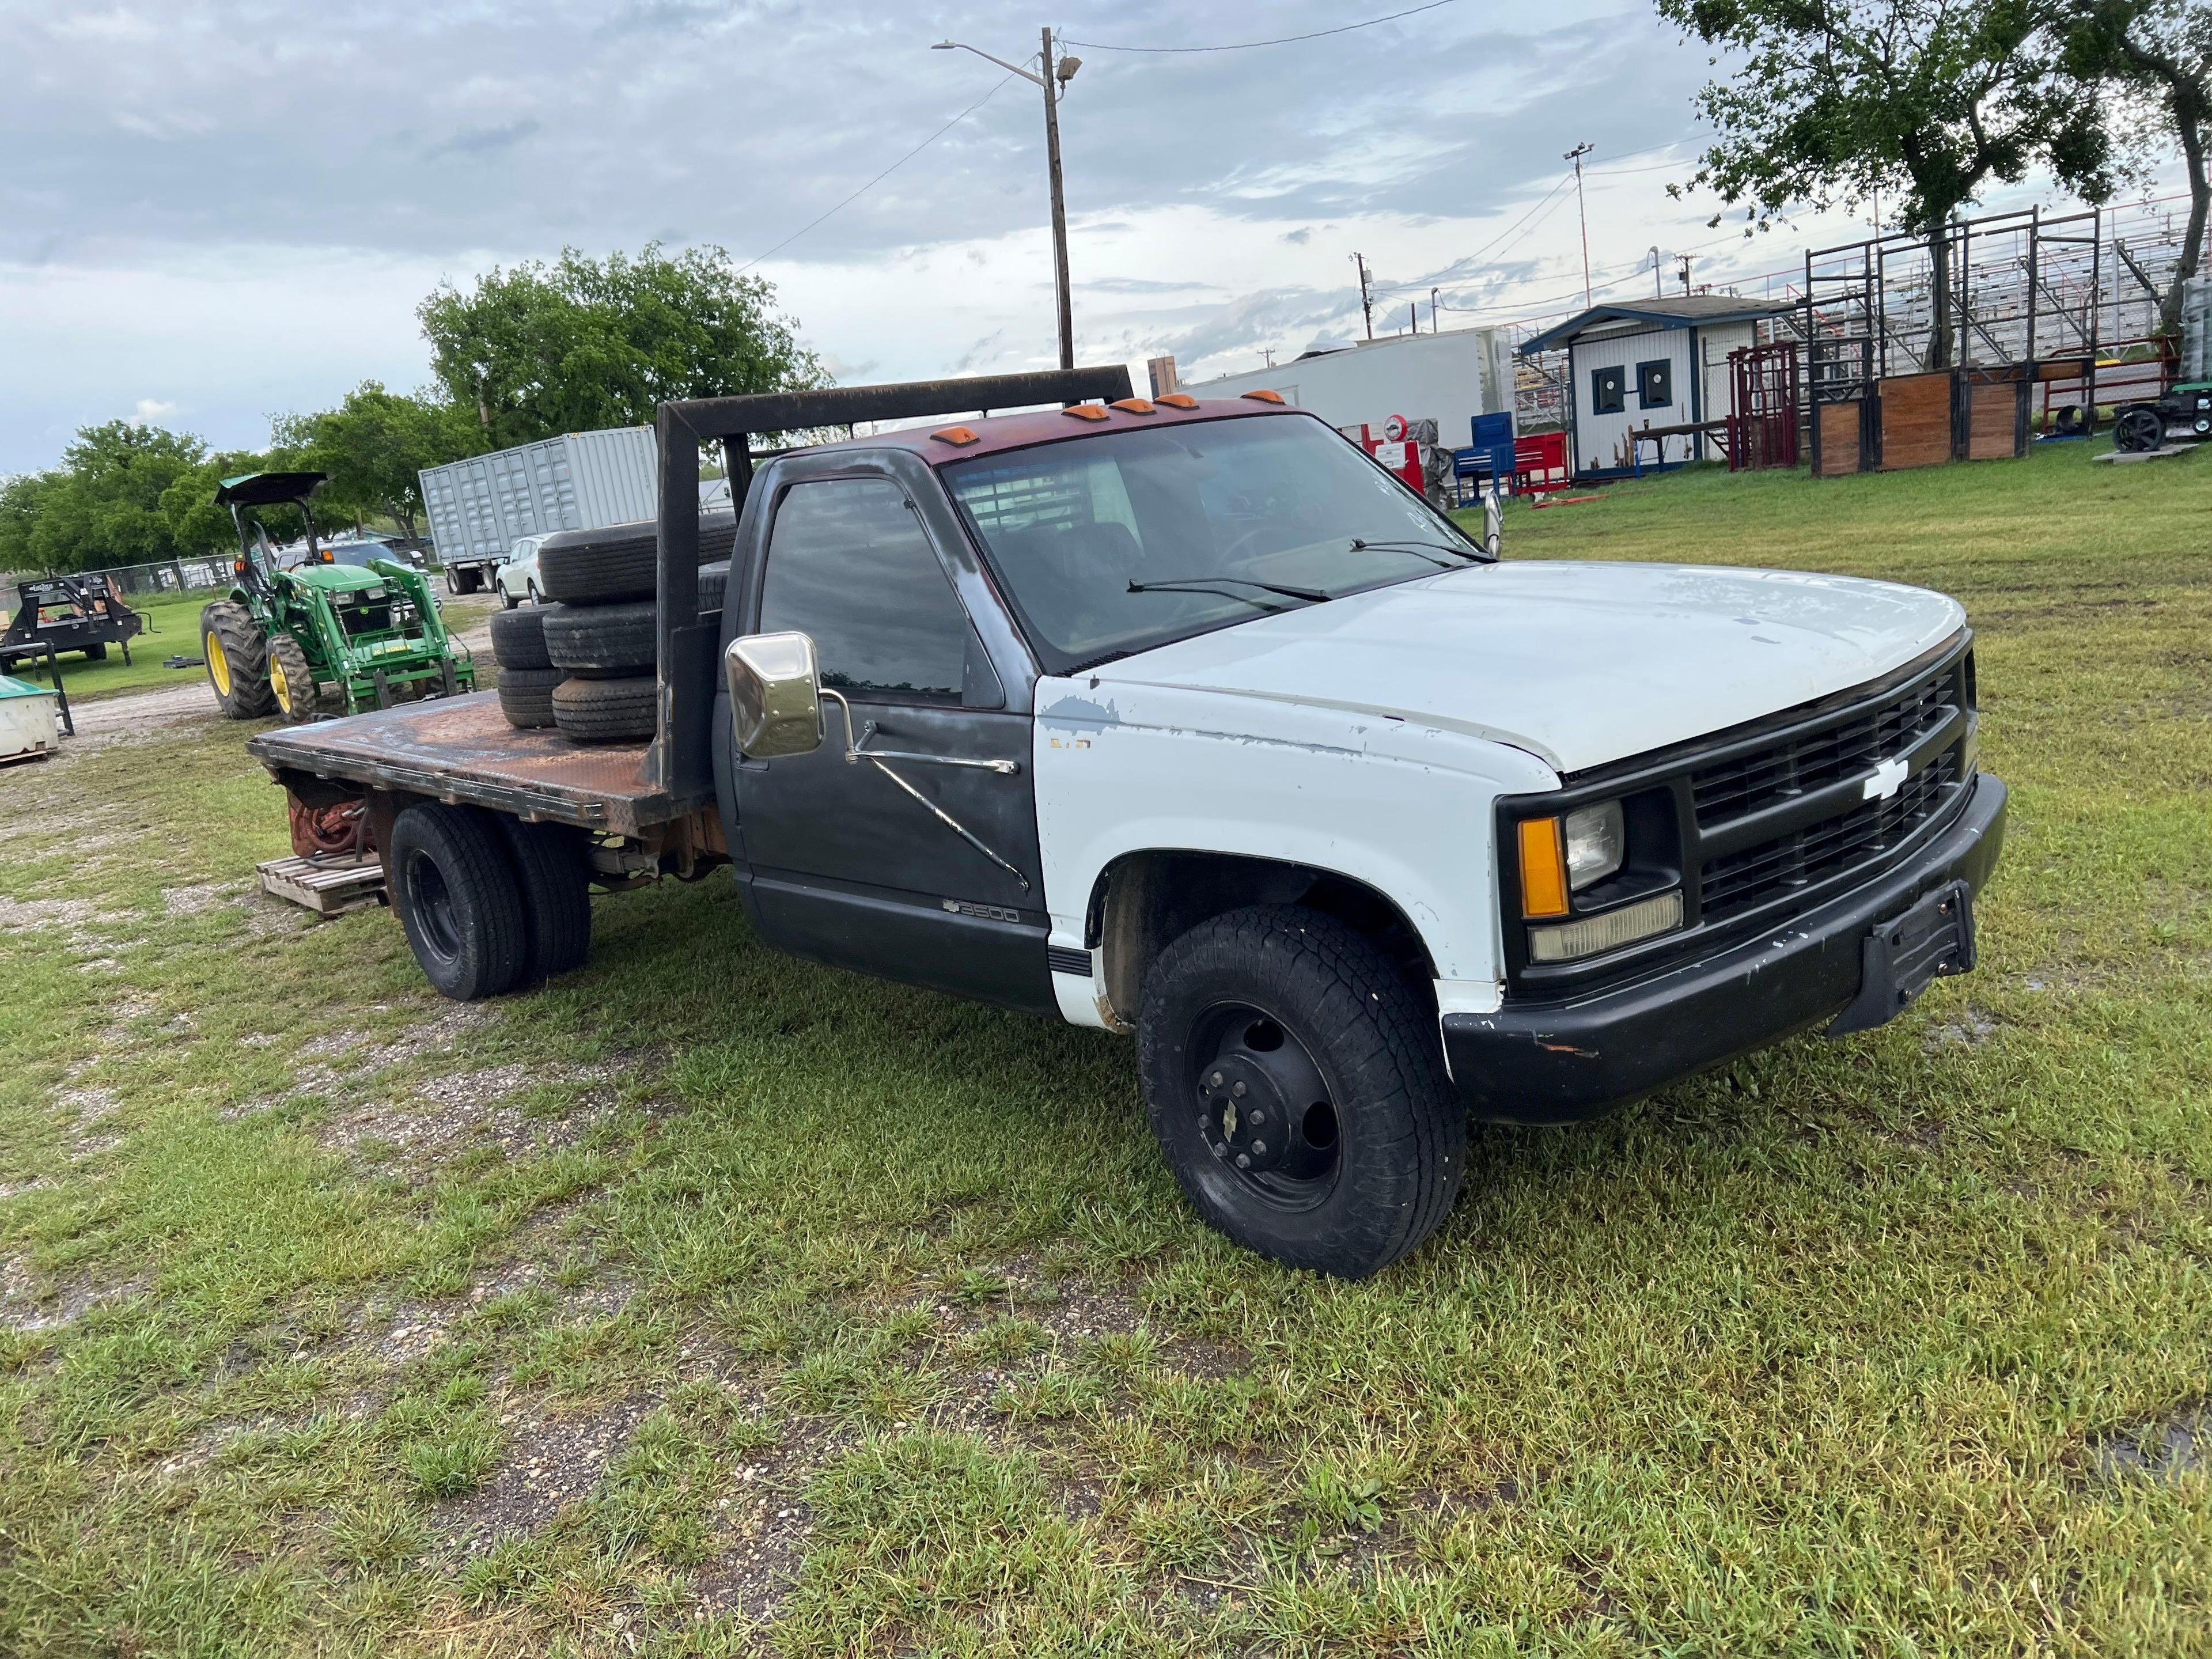 1994 Chevrolet 3500 Flatbed - Standard Transmission - 2 wd - 181,597 miles - Starts and Runs